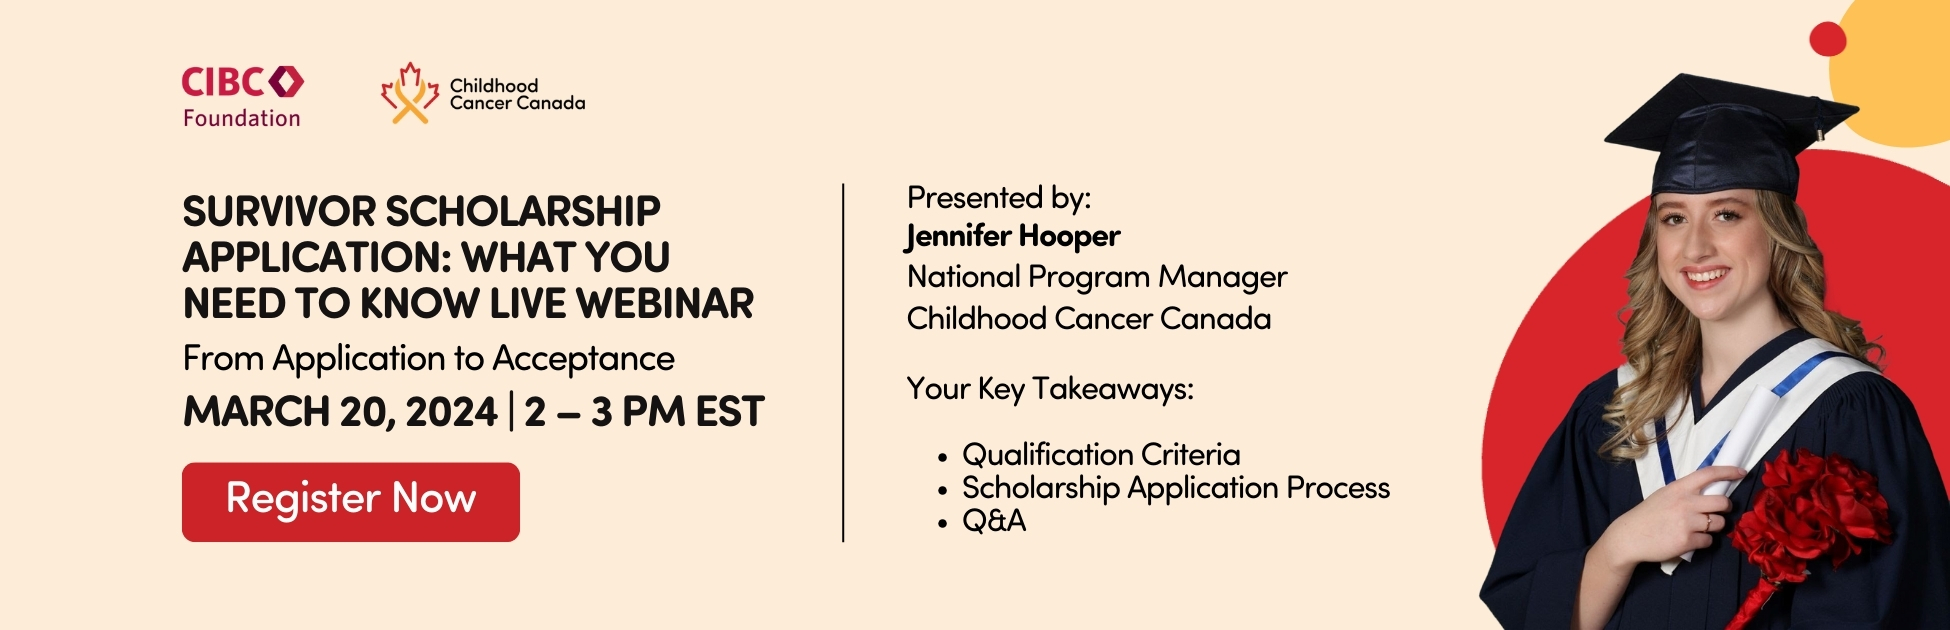 Survivor-Scholarship-Application-What-You-Need-to-Know-LIVE-webinar-(5).jpg